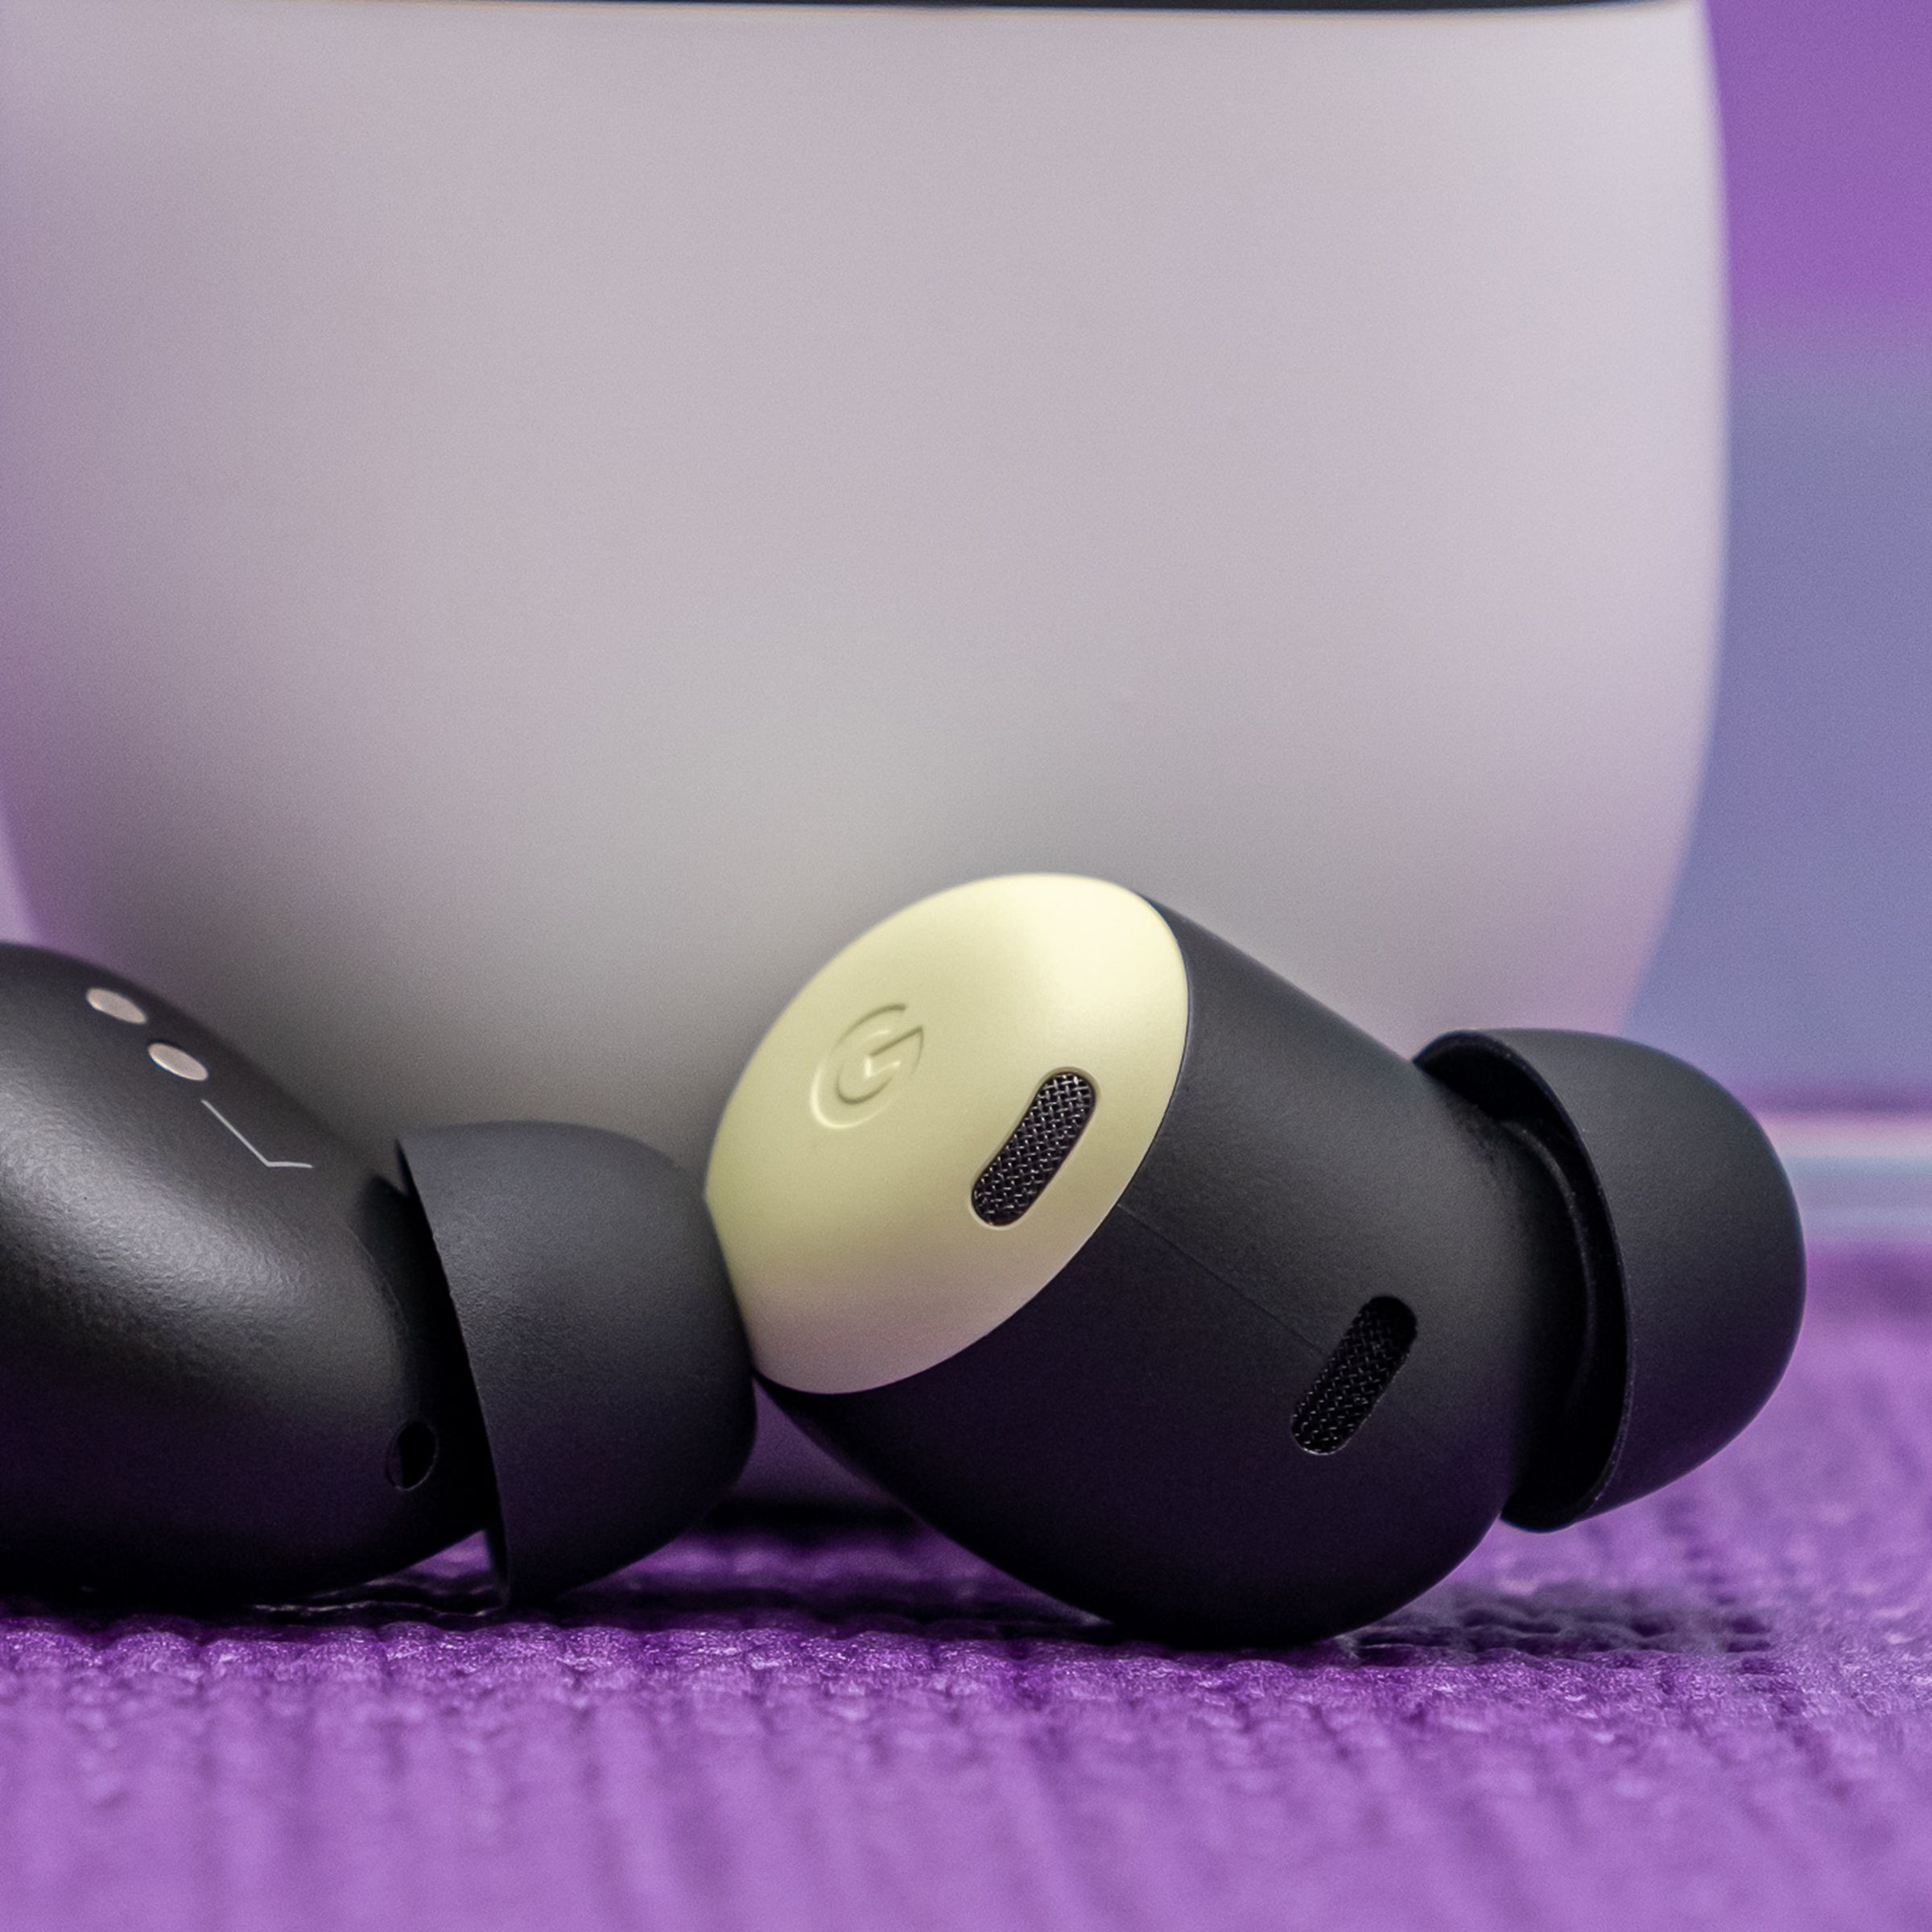 Google's Pixel Buds Pro earphones, in lemongrass yellow, rest at the foot of their white charging case on a table.